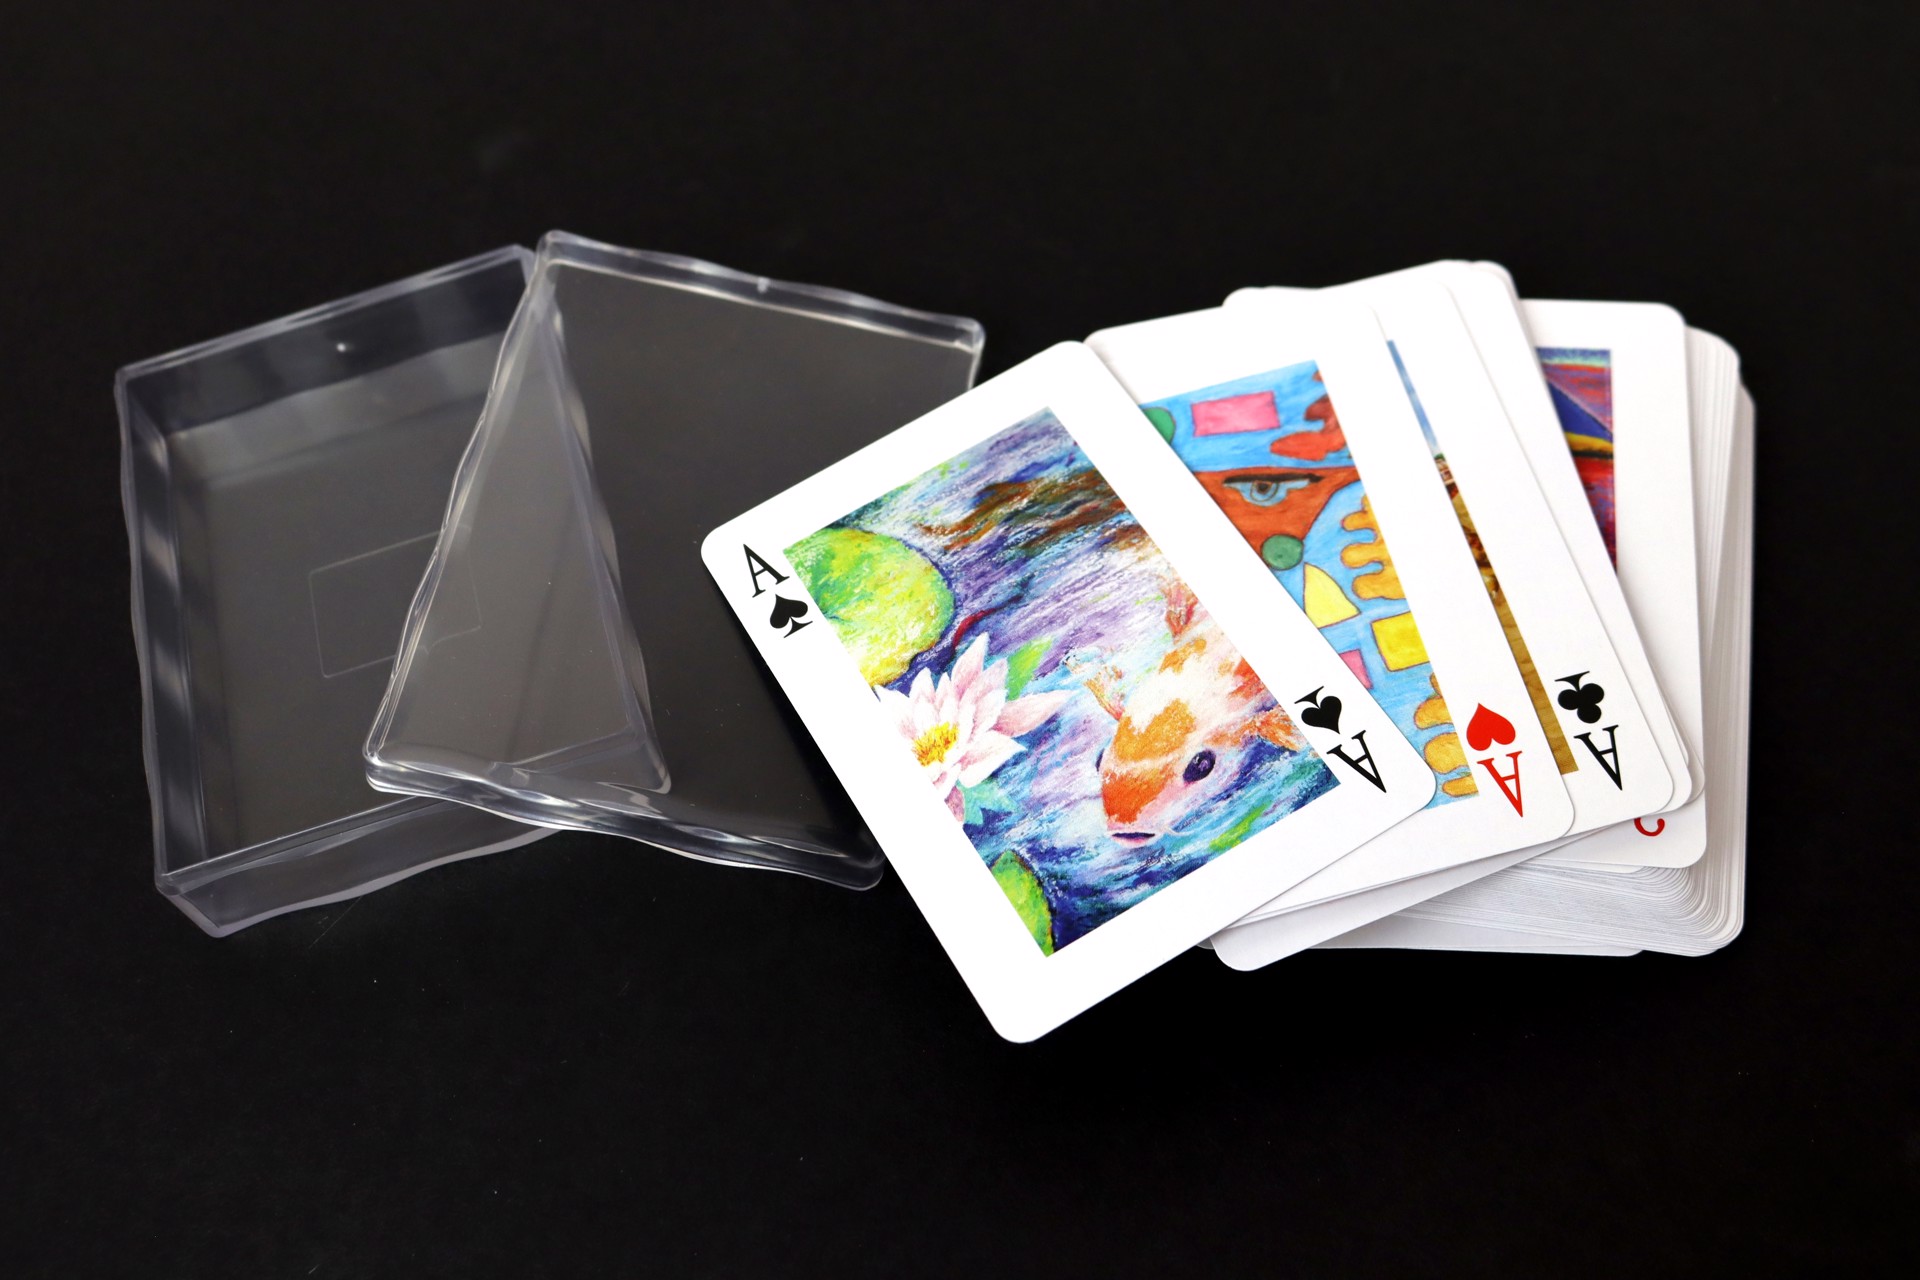 Deck of Playing Cards, 2022 by Art Enables Merchandise